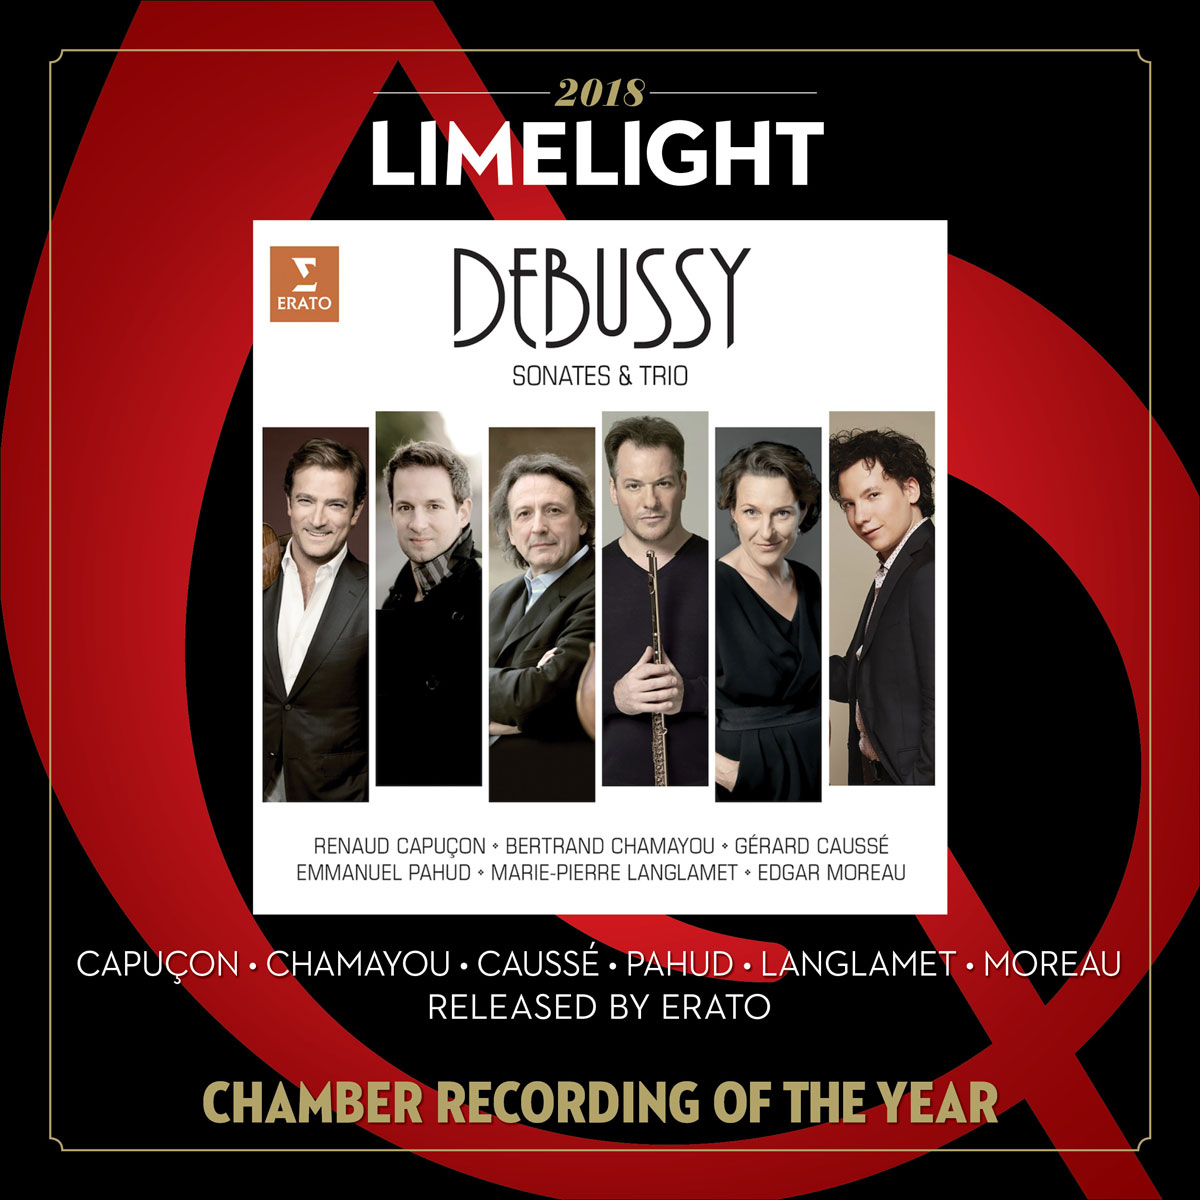 Chamber Recording of the Year, Limelight